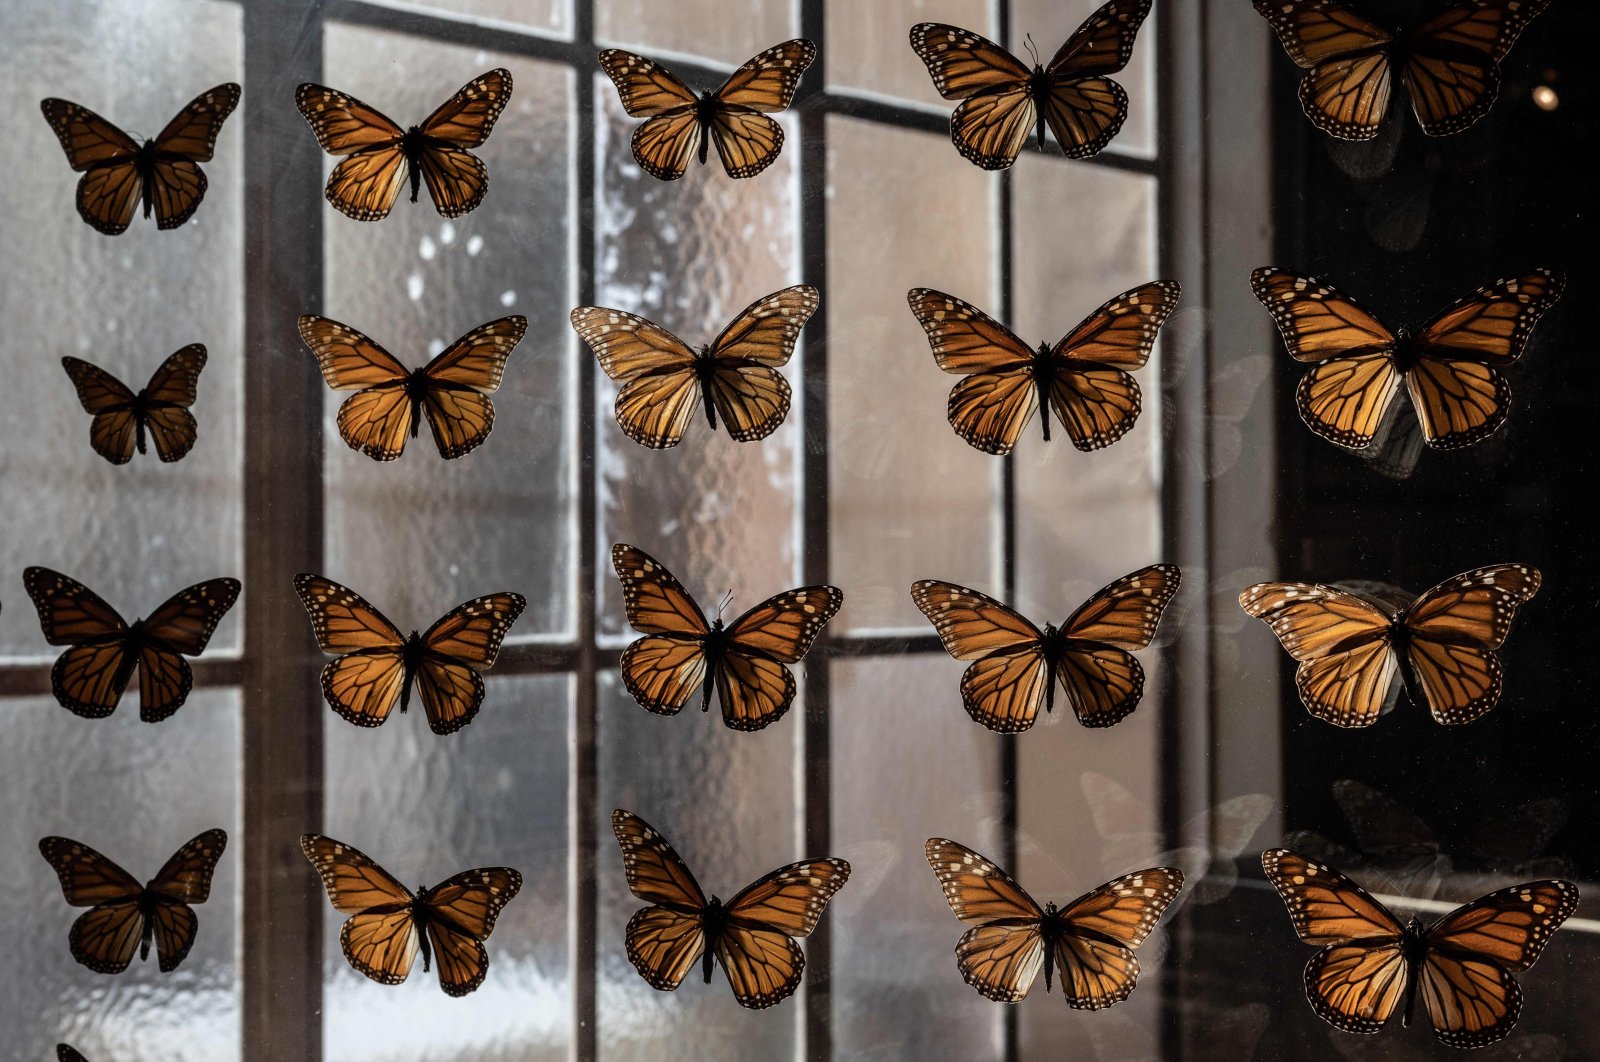 A collection of preserved Monarch butterflies is seen at the Pacific Grove Museum of Natural History in Santa Cruz, California, U.S., Jan. 26, 2023. (AFP Photo)